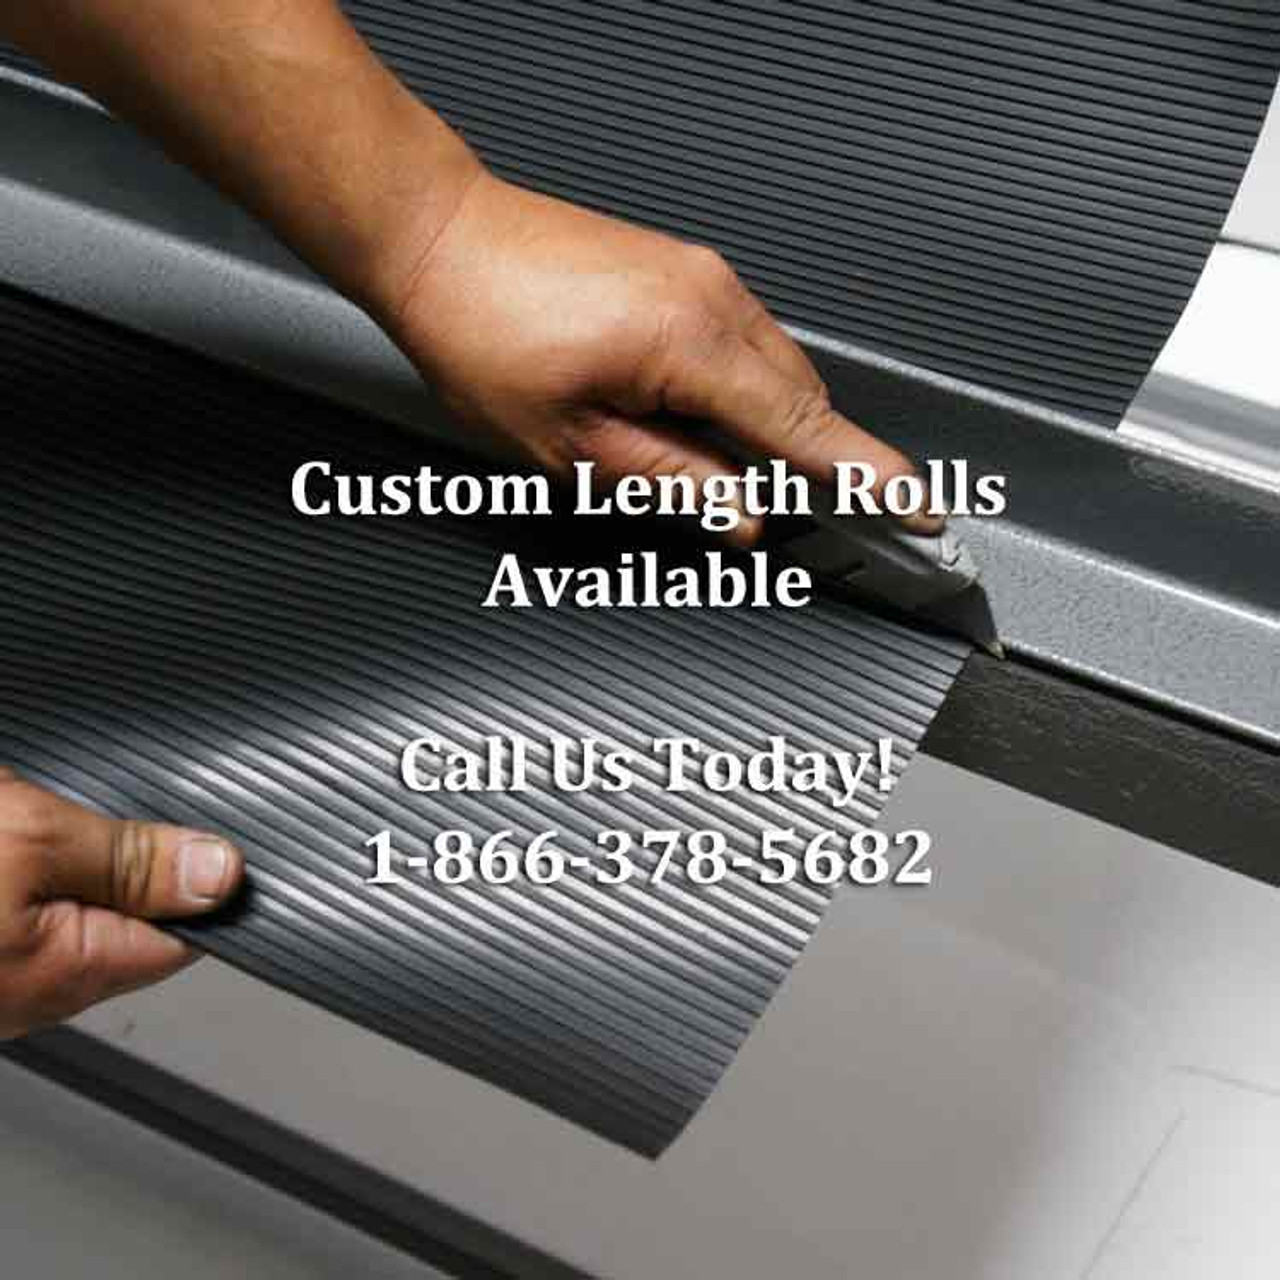 Rubber-Cal Fine Rib Corrugated Rubber Floor Mats - 1/8 Thick x 3ft x 1ft  Runners